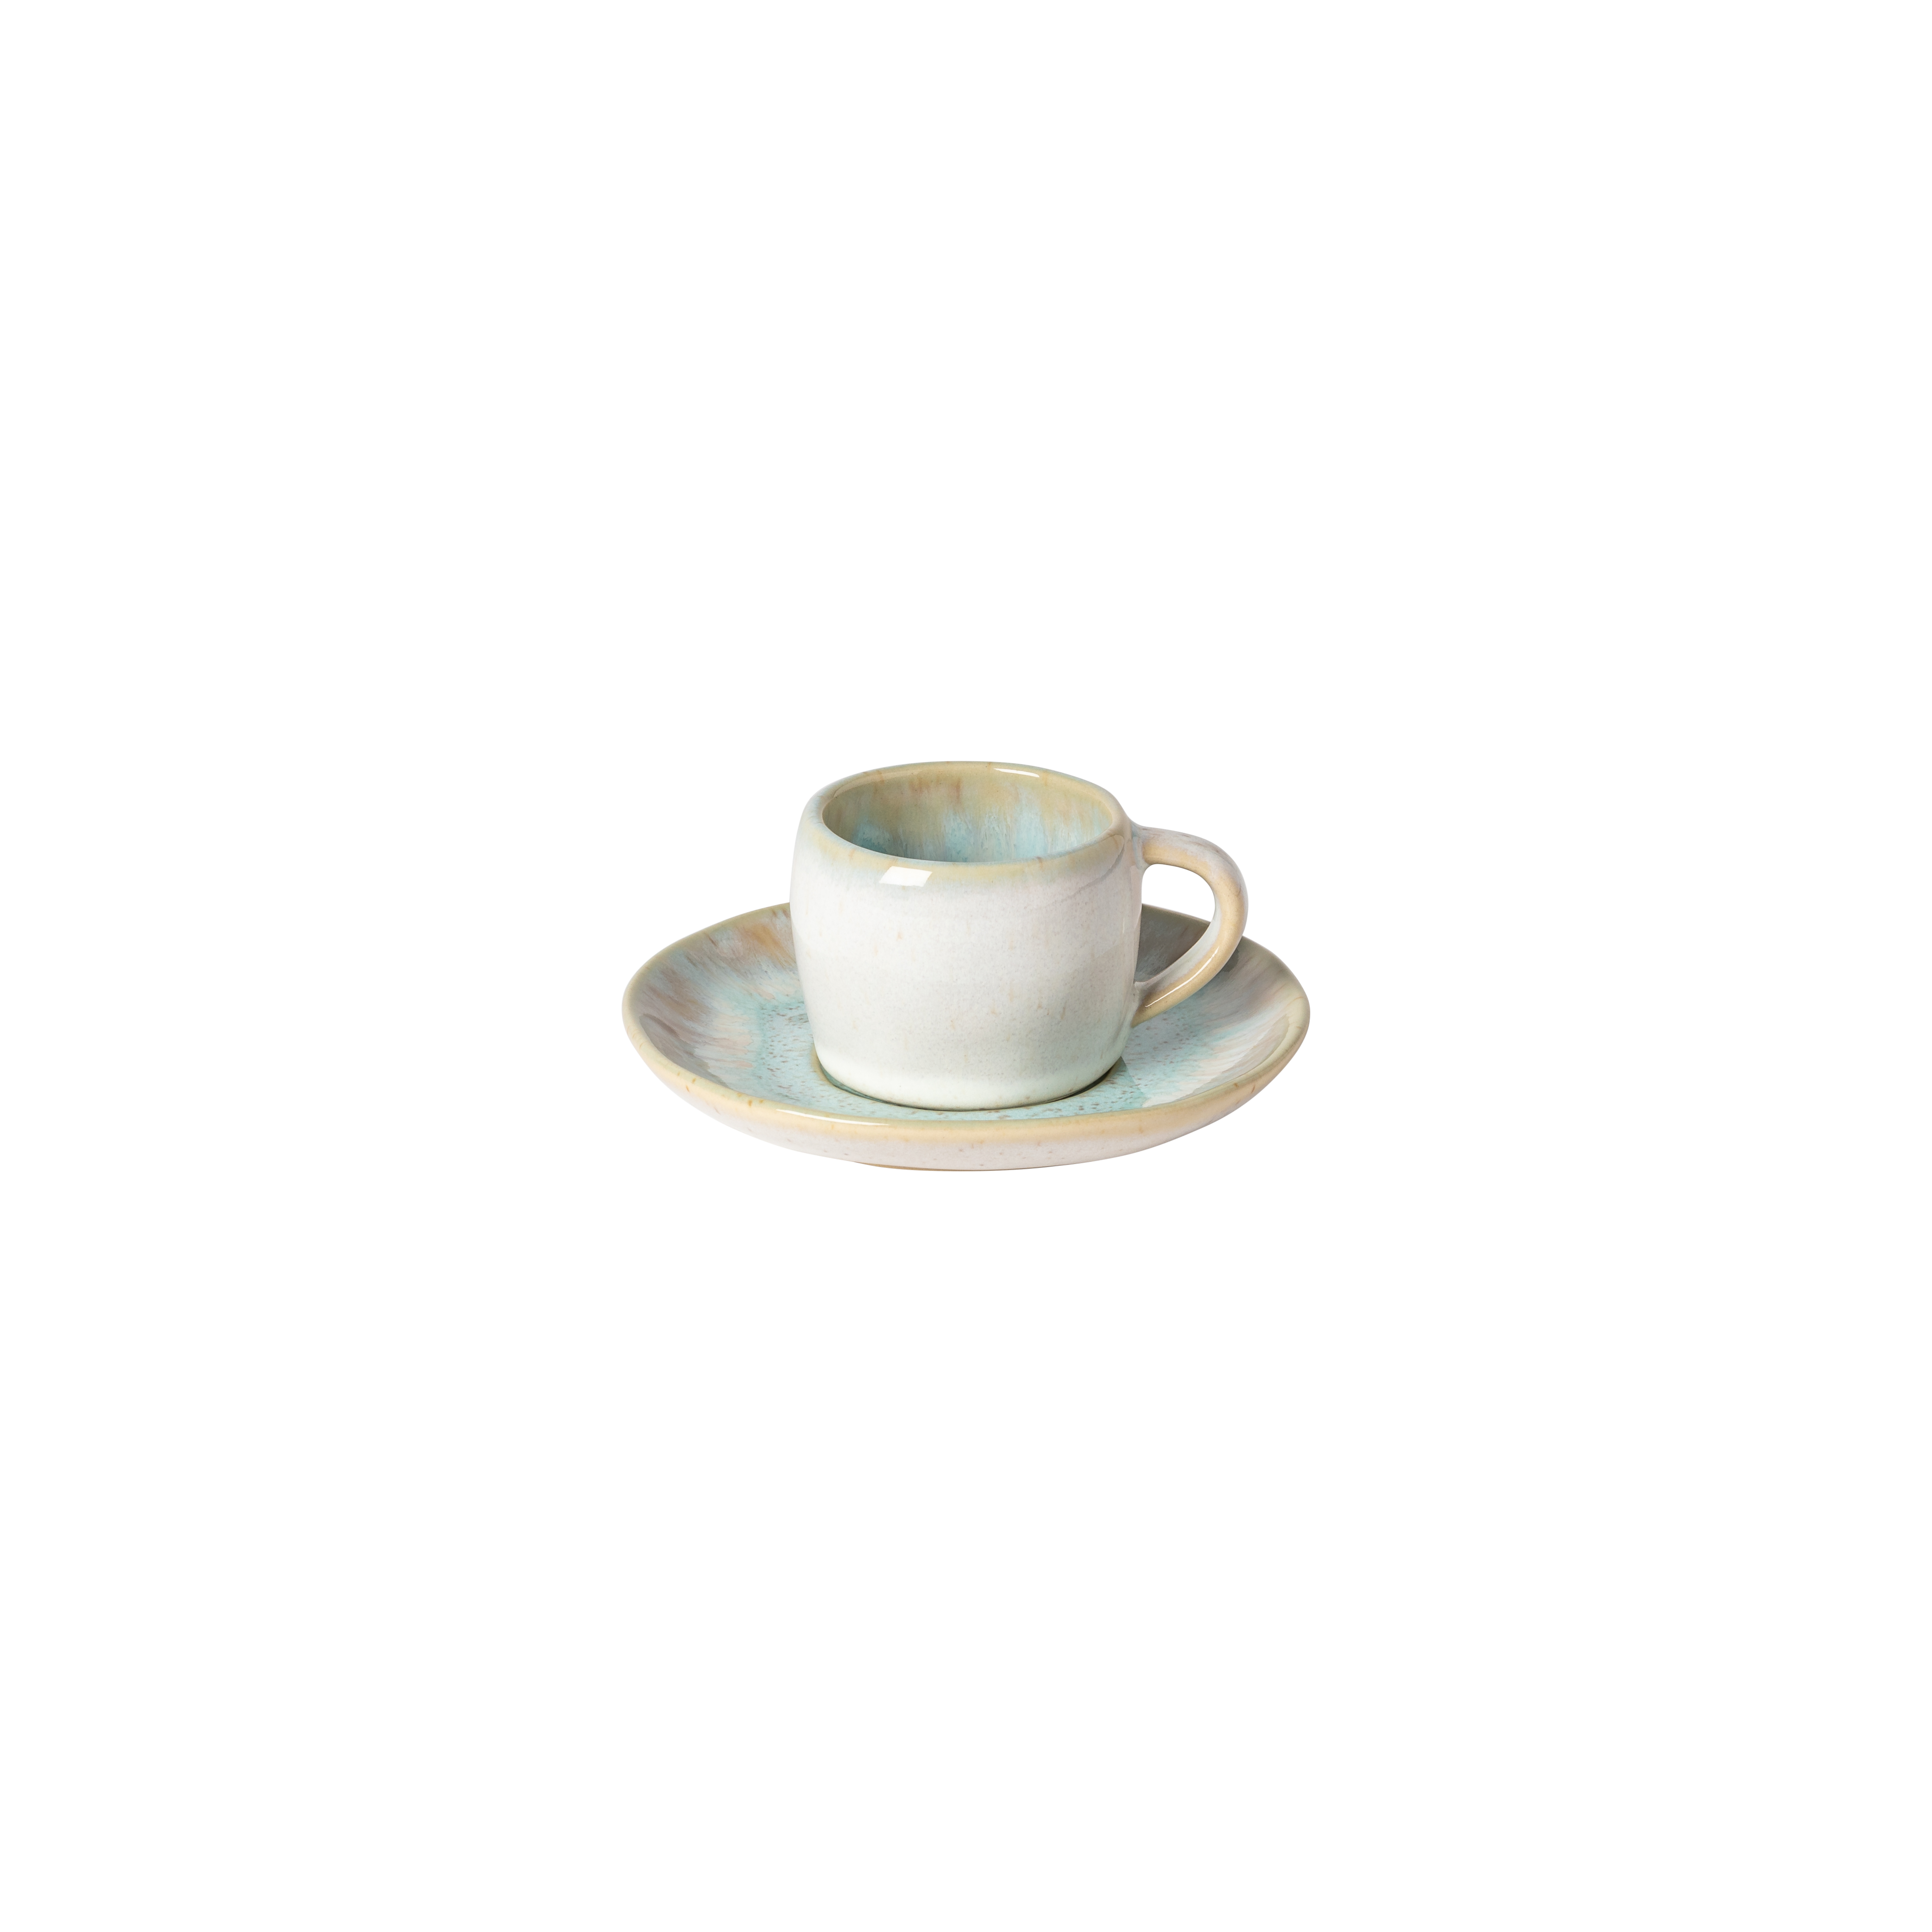 Eivissa Sea Blue Coffee Cup And Saucer 0.07l Gift